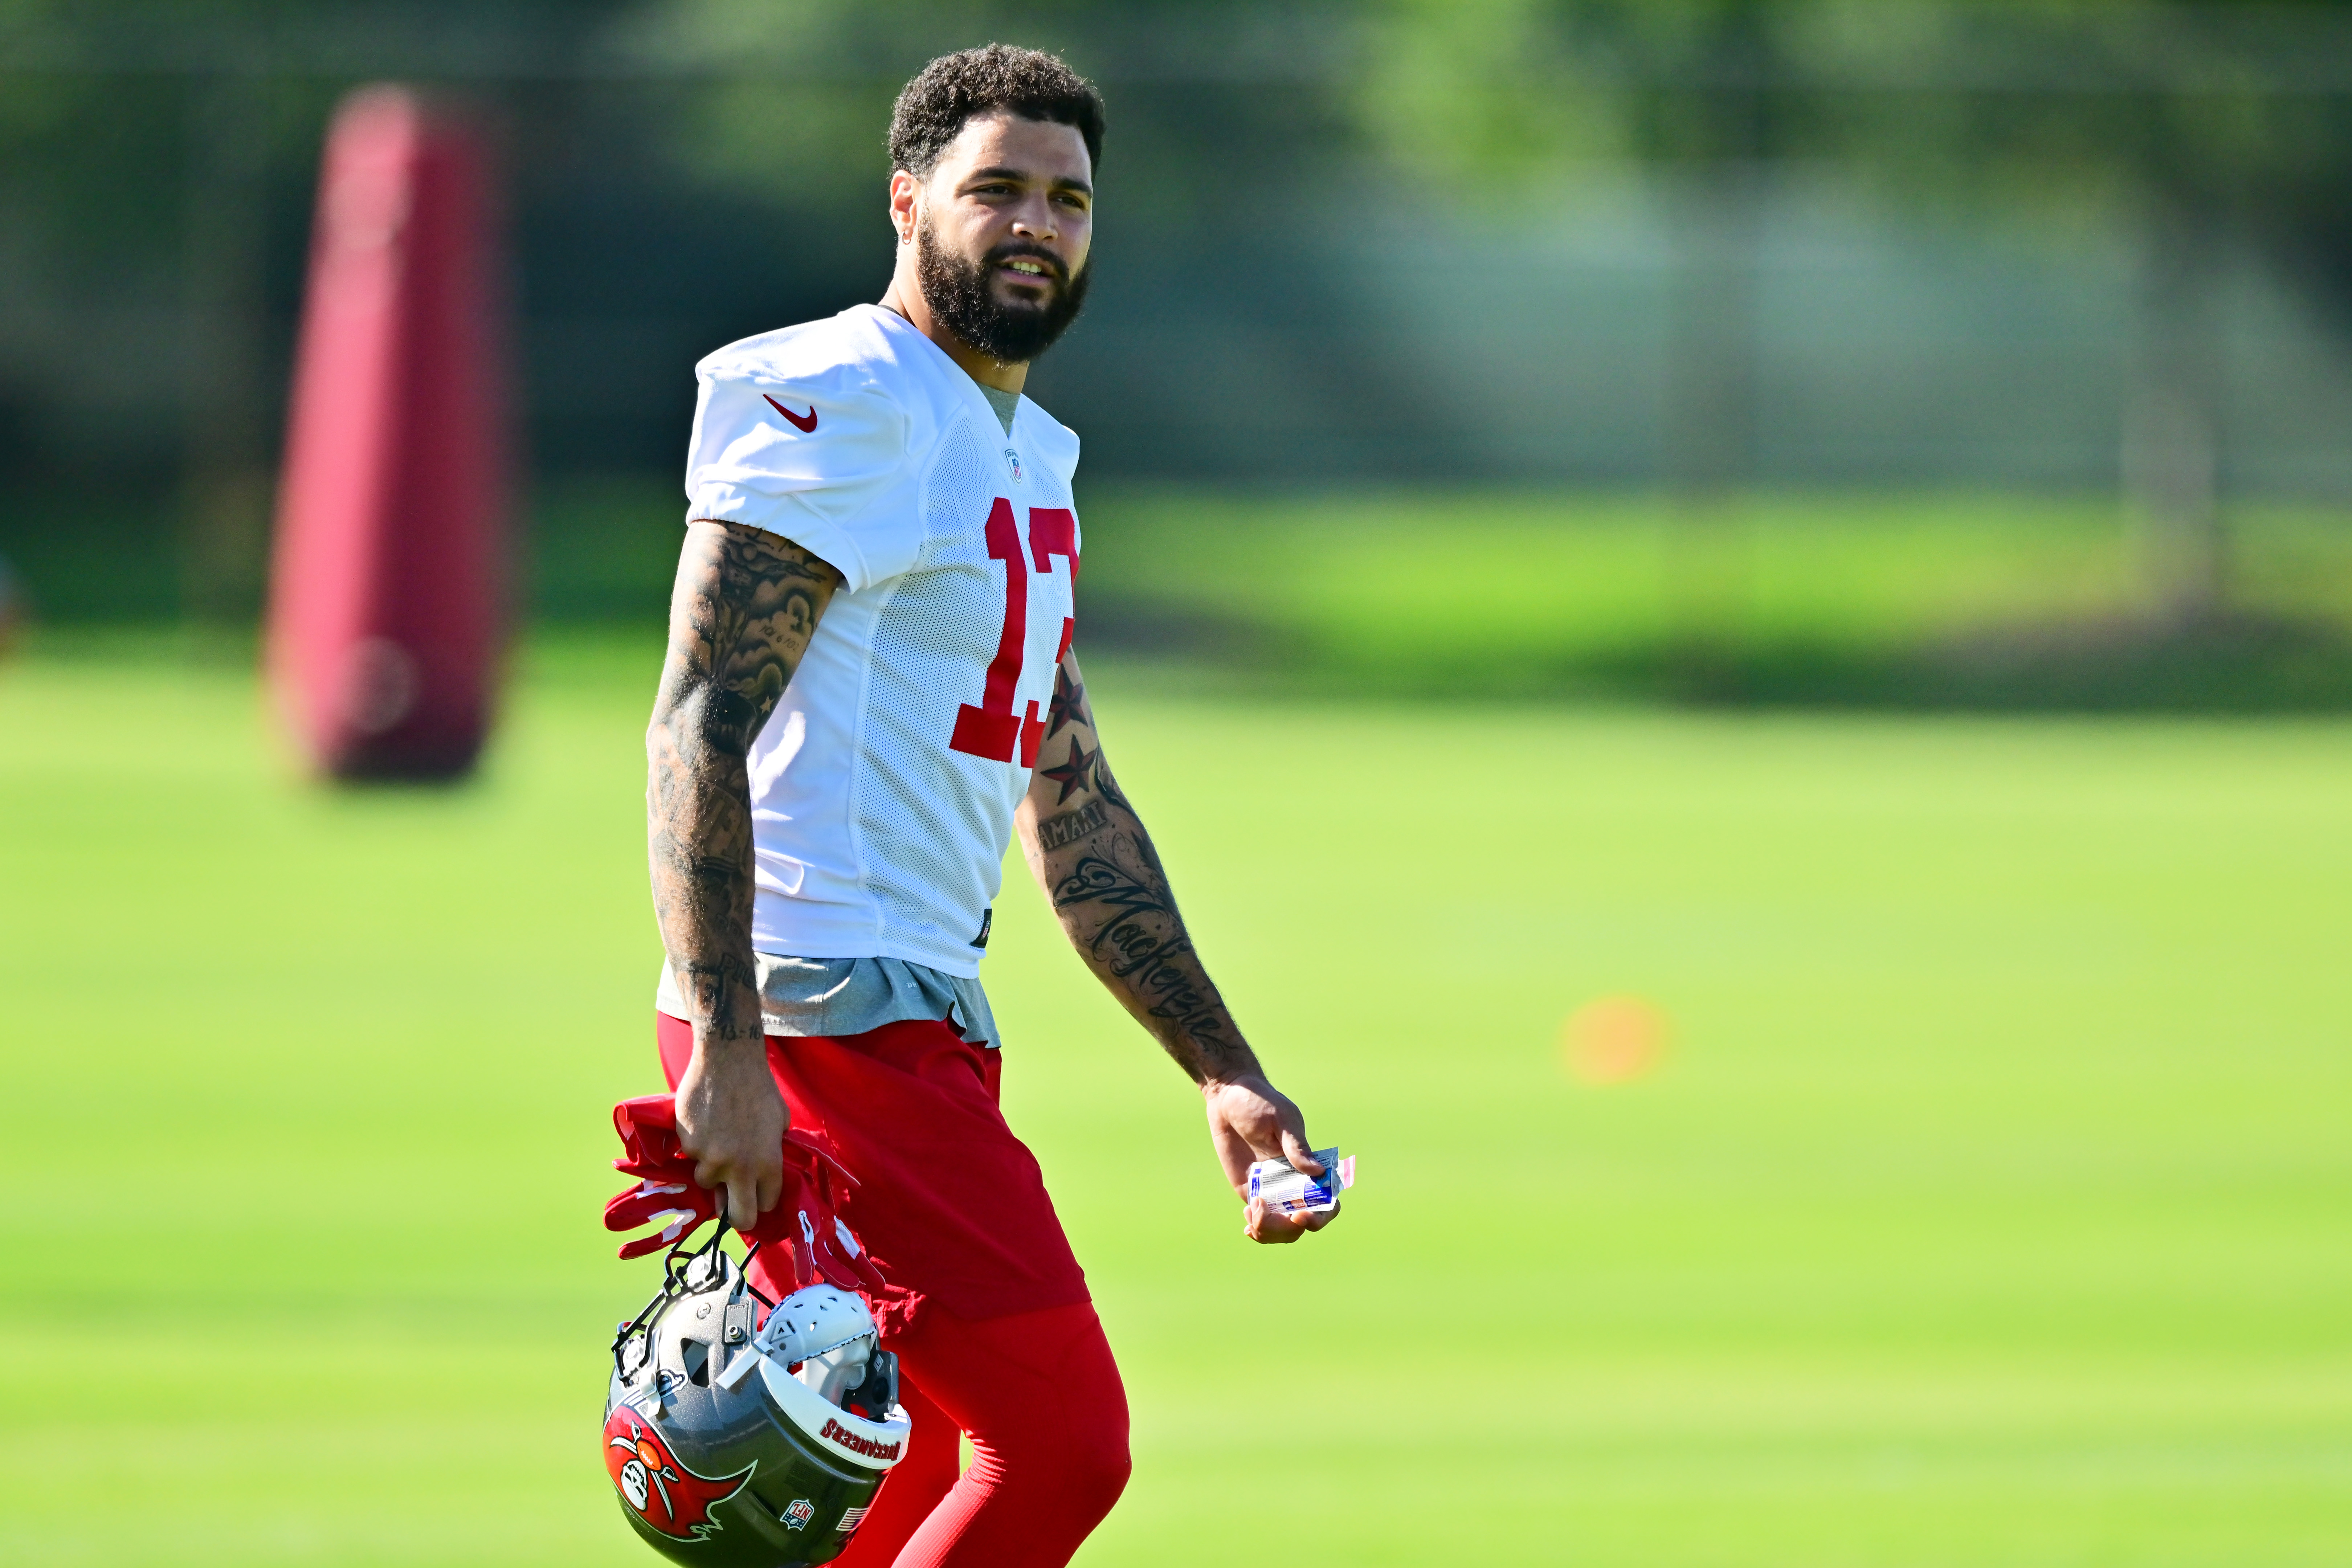 Mike Evans #13 of Tampa Bay Buccaneers looks on during the 2022 Buccaneers minicamp at AdventHealth Training Center on June 08, 2022 in Tampa, Florida.